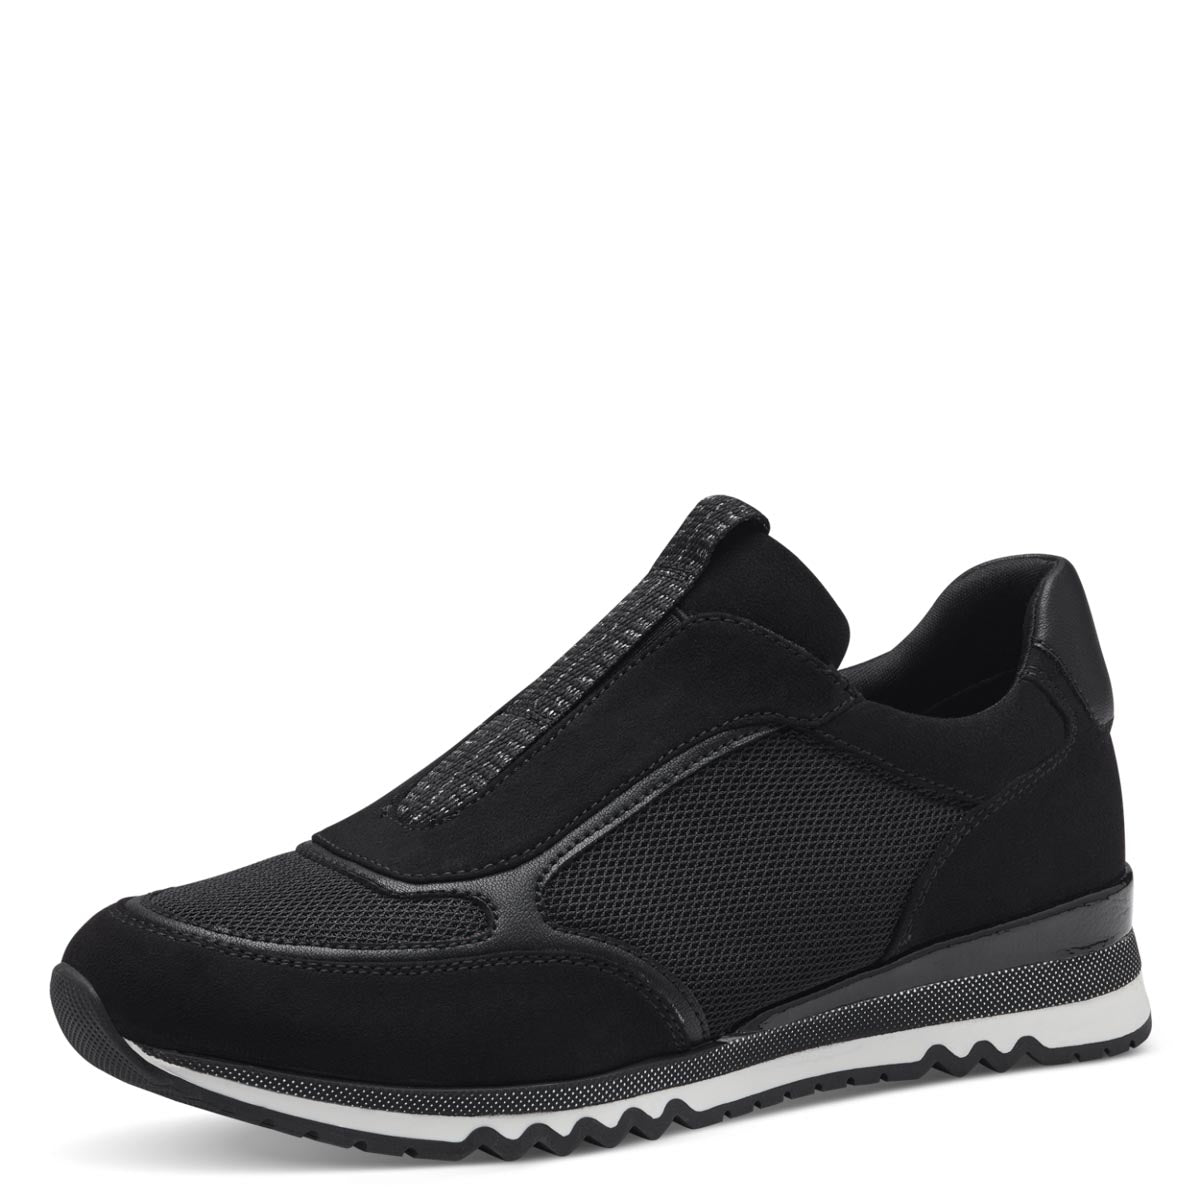 Marco Tozzi Black Vegan Runner with Elasticated Slip-On and Wedge Sole